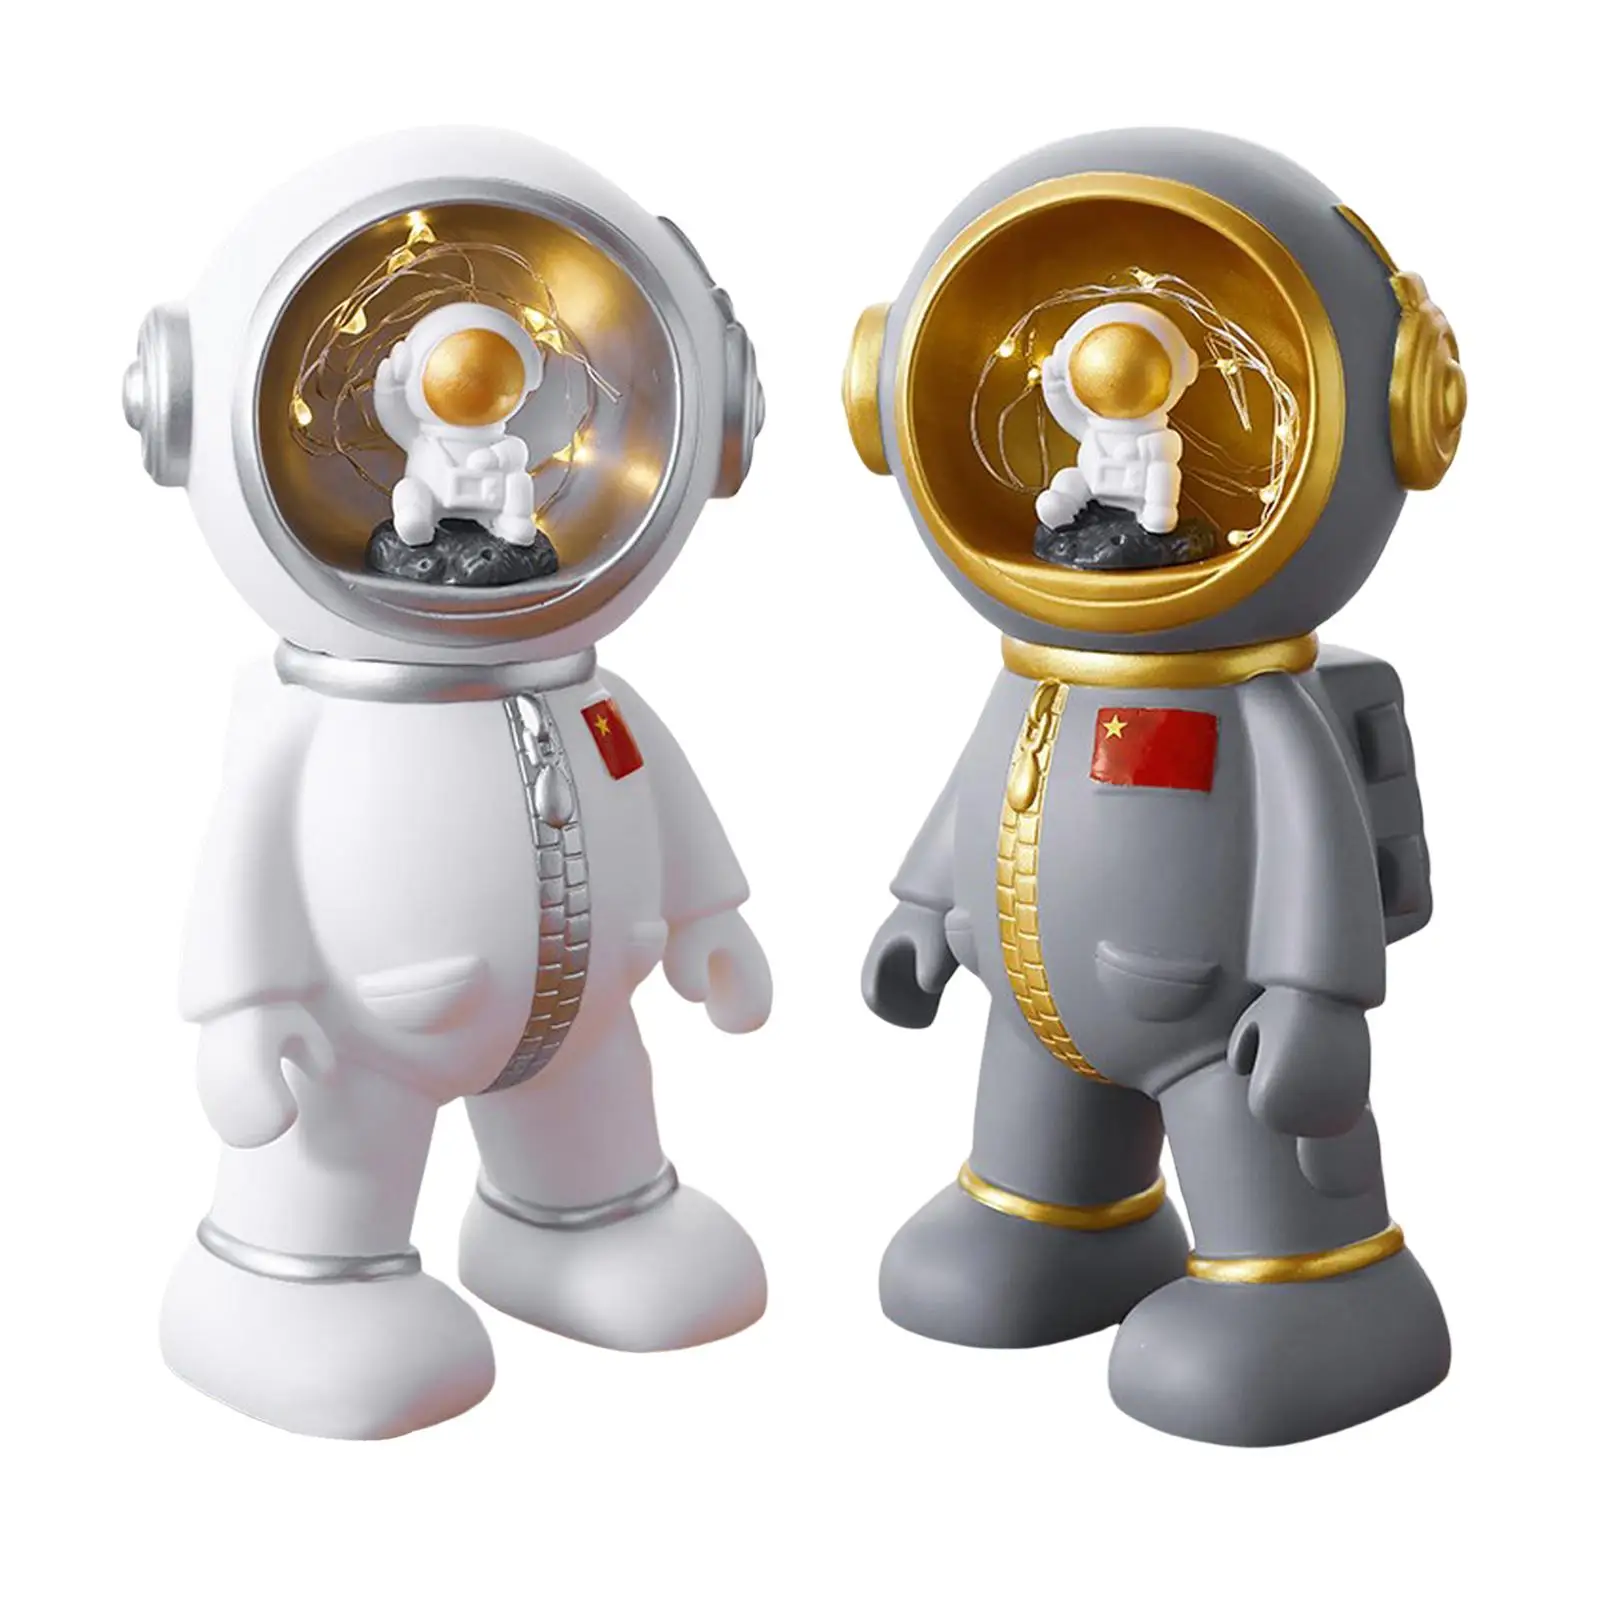 Portable Astronaut Piggy Bank Decorative with Lamp Coin Box for Girls Tabletop Gifts